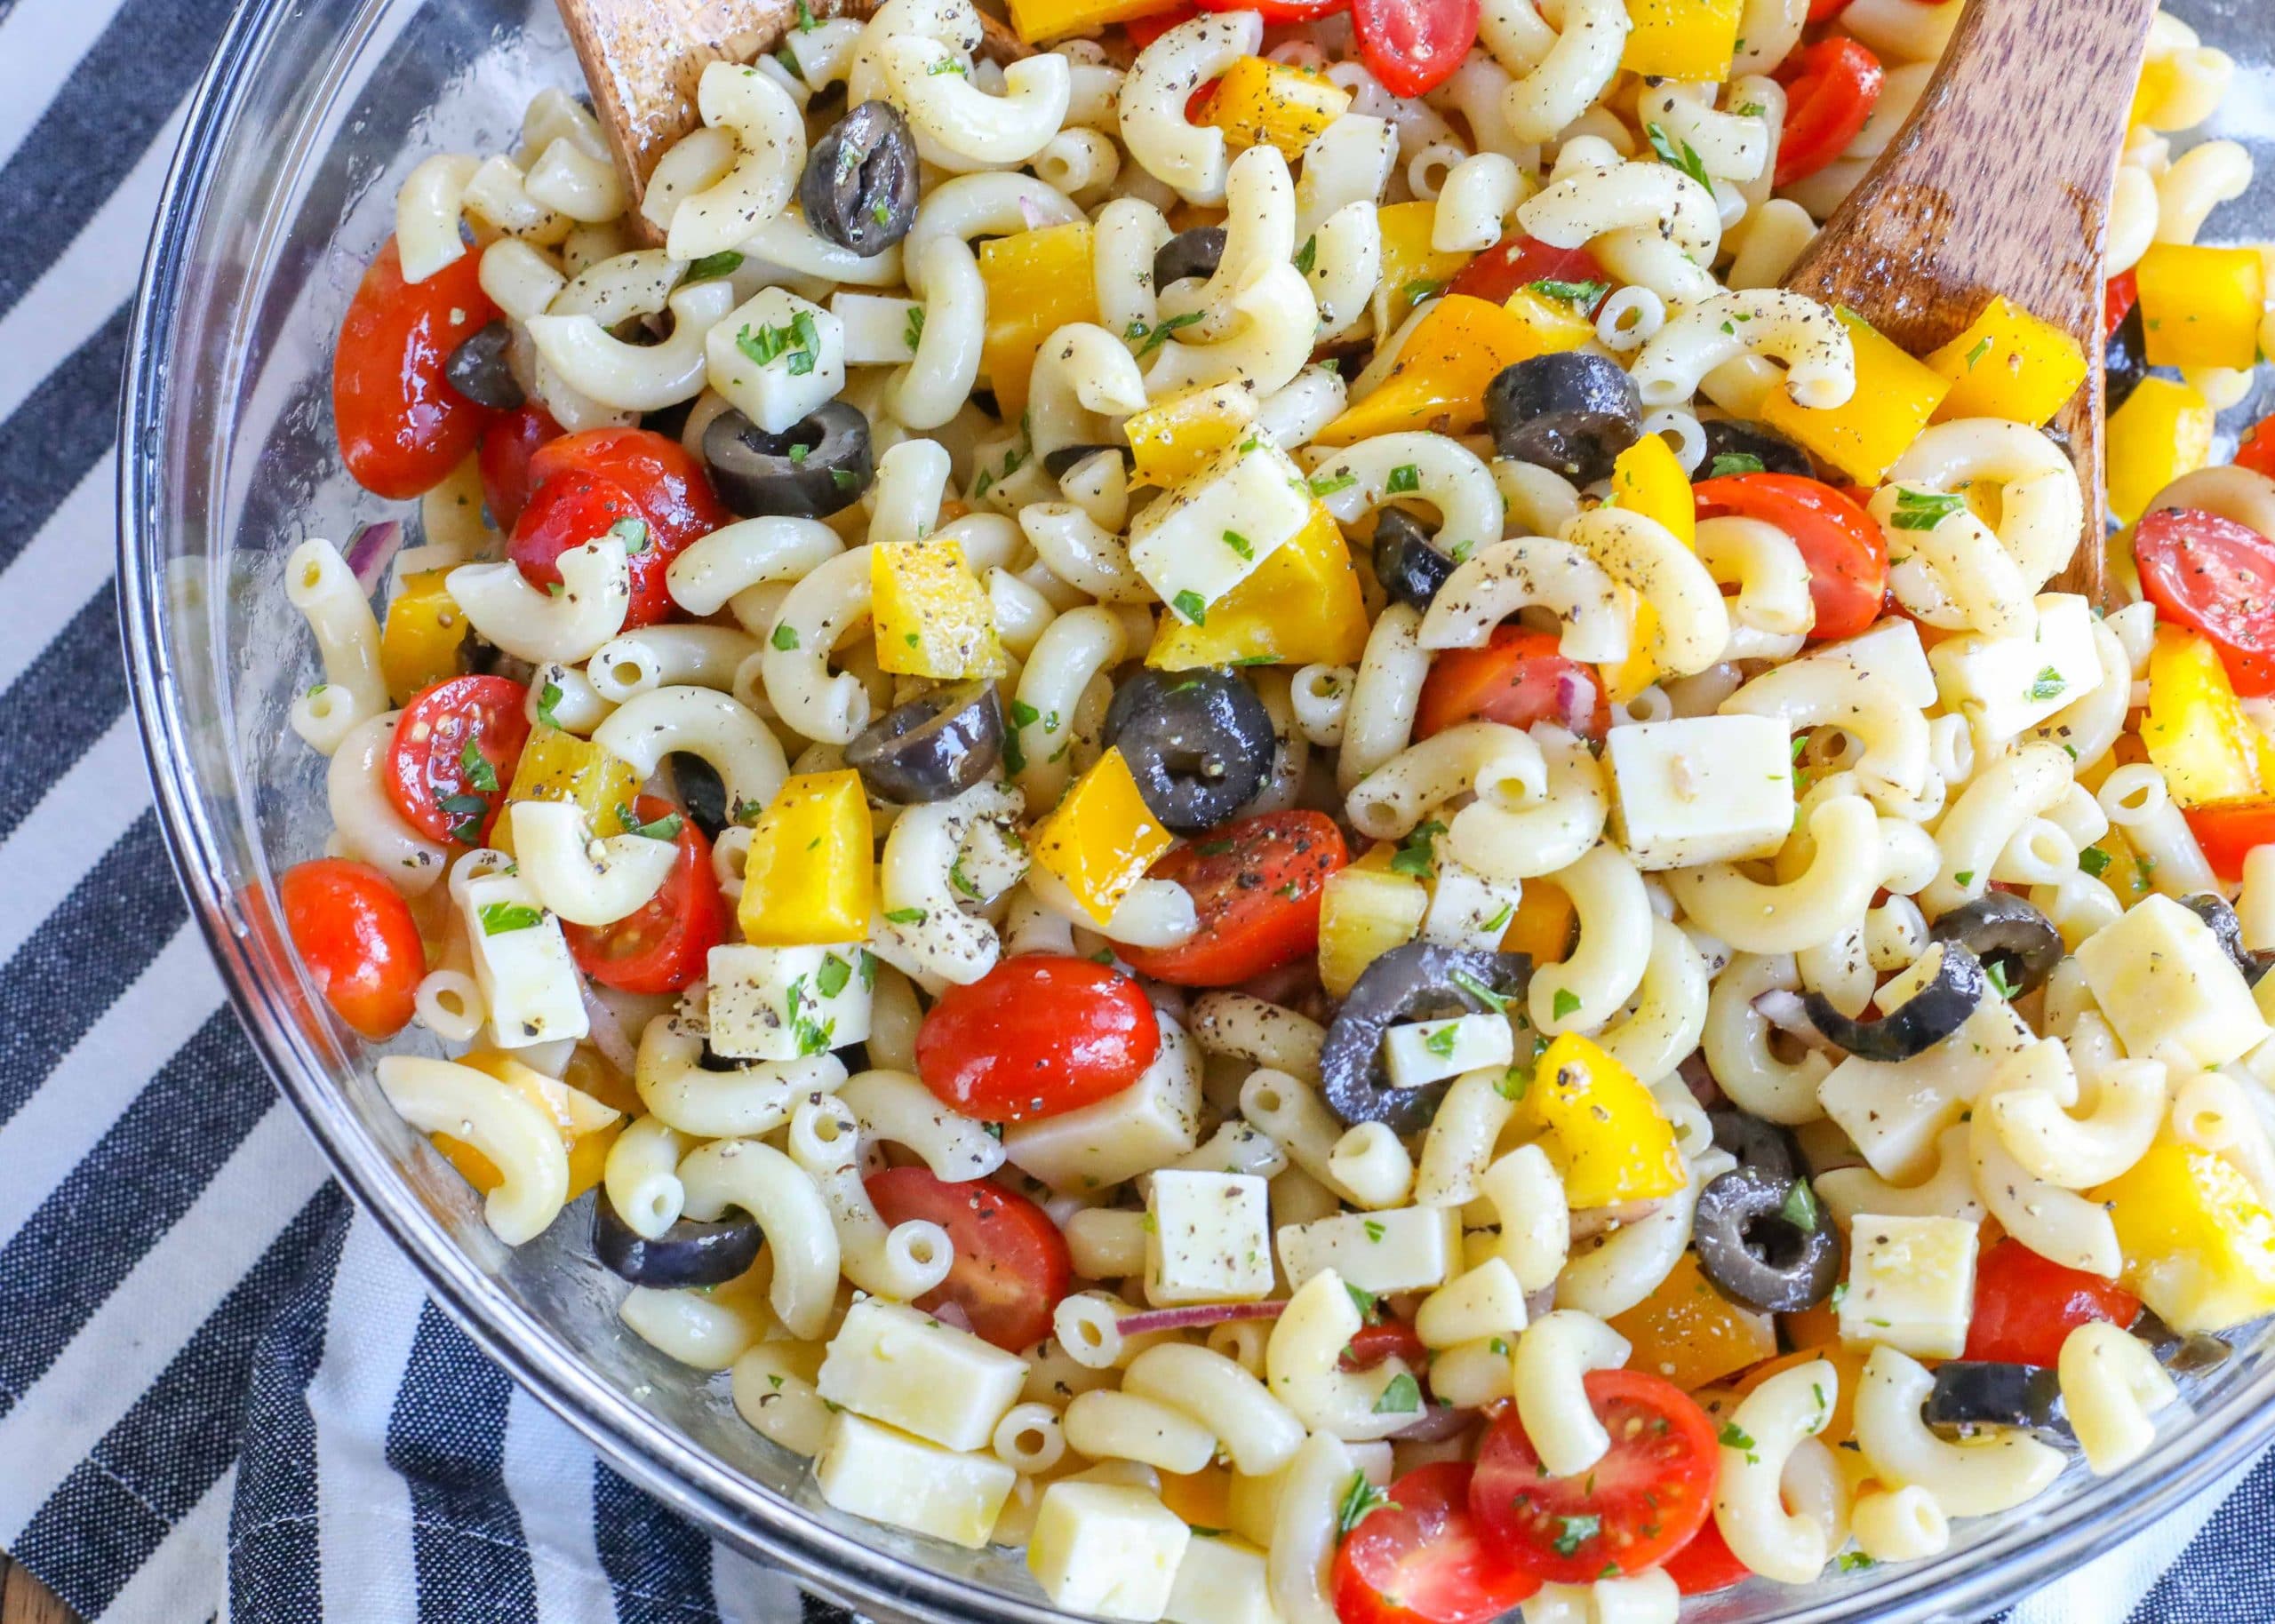 https://chocolatewithgrace.com/wp-content/uploads/2021/03/CWG-Potluck-Pasta-Salad-4-1-of-1-scaled.jpg